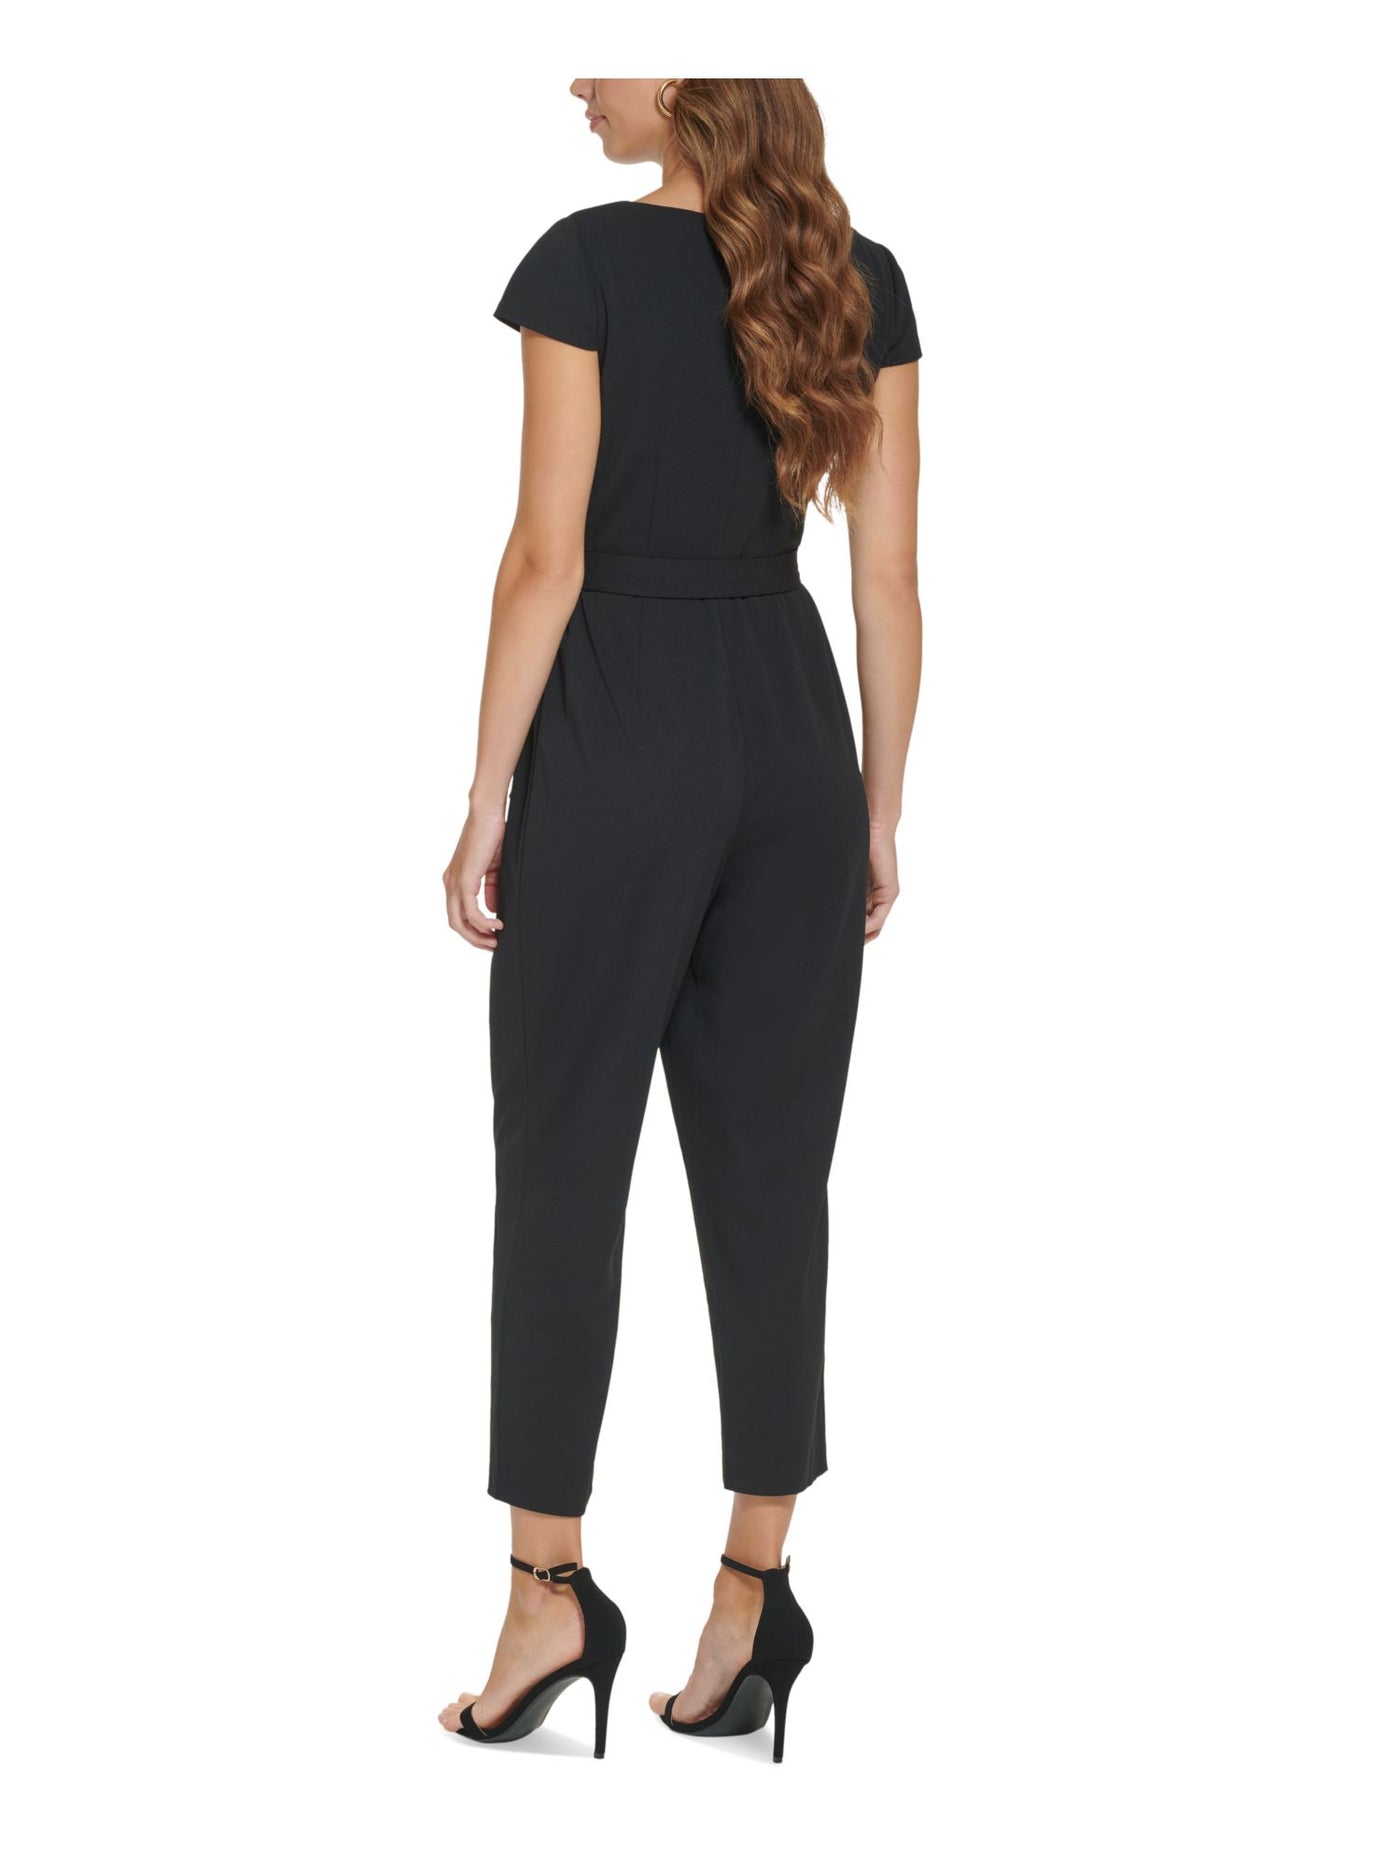 DKNY Womens Black Cut Out Zippered Tie-belt Pleated Cap Sleeve Boat Neck Wear To Work Cropped Jumpsuit 8